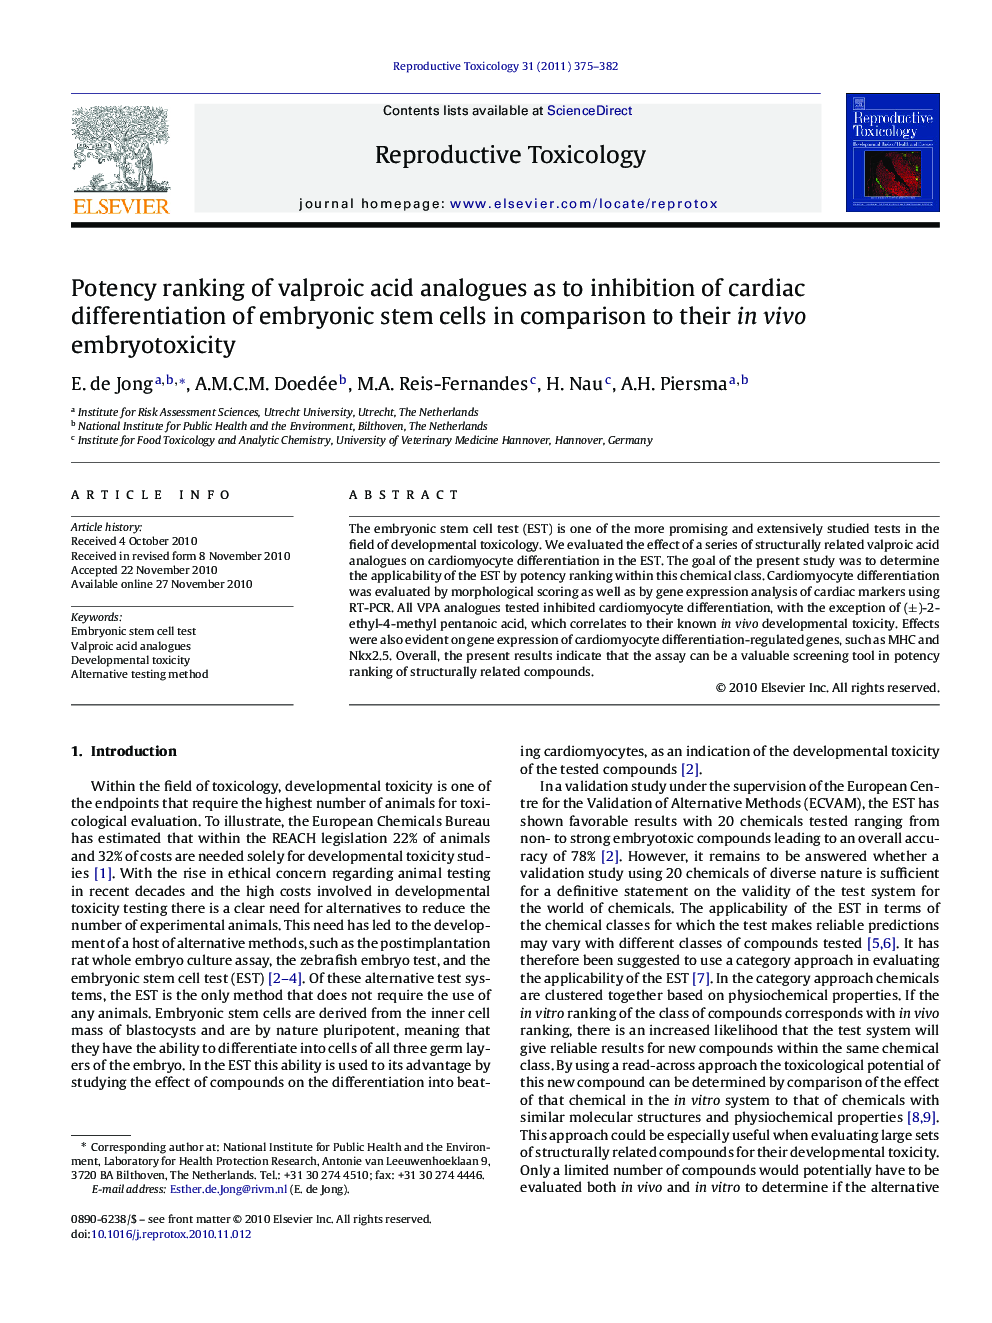 Potency ranking of valproic acid analogues as to inhibition of cardiac differentiation of embryonic stem cells in comparison to their in vivo embryotoxicity